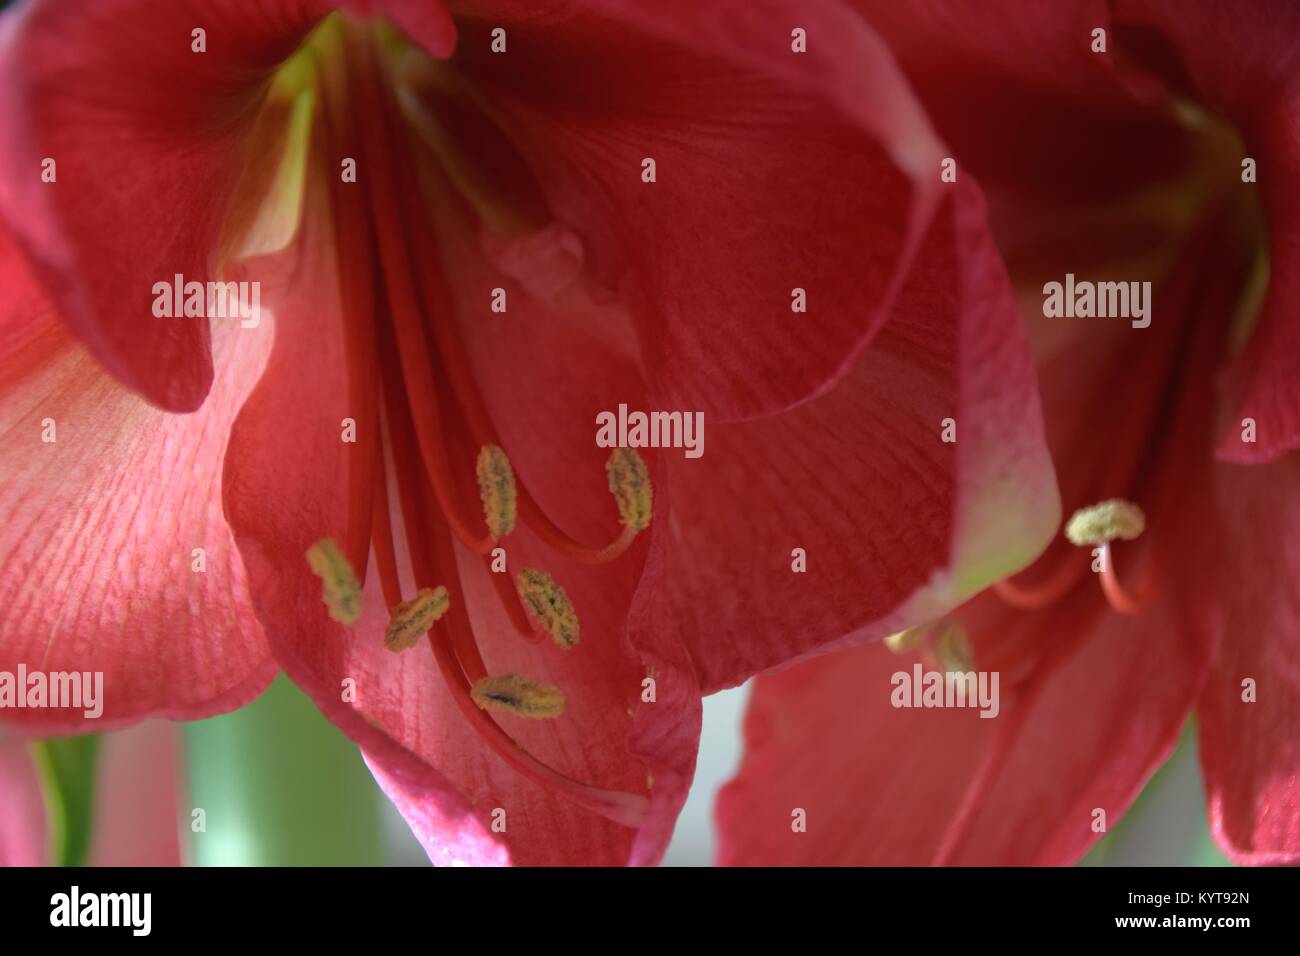 two flowers of an Amaryllis plant Stock Photo